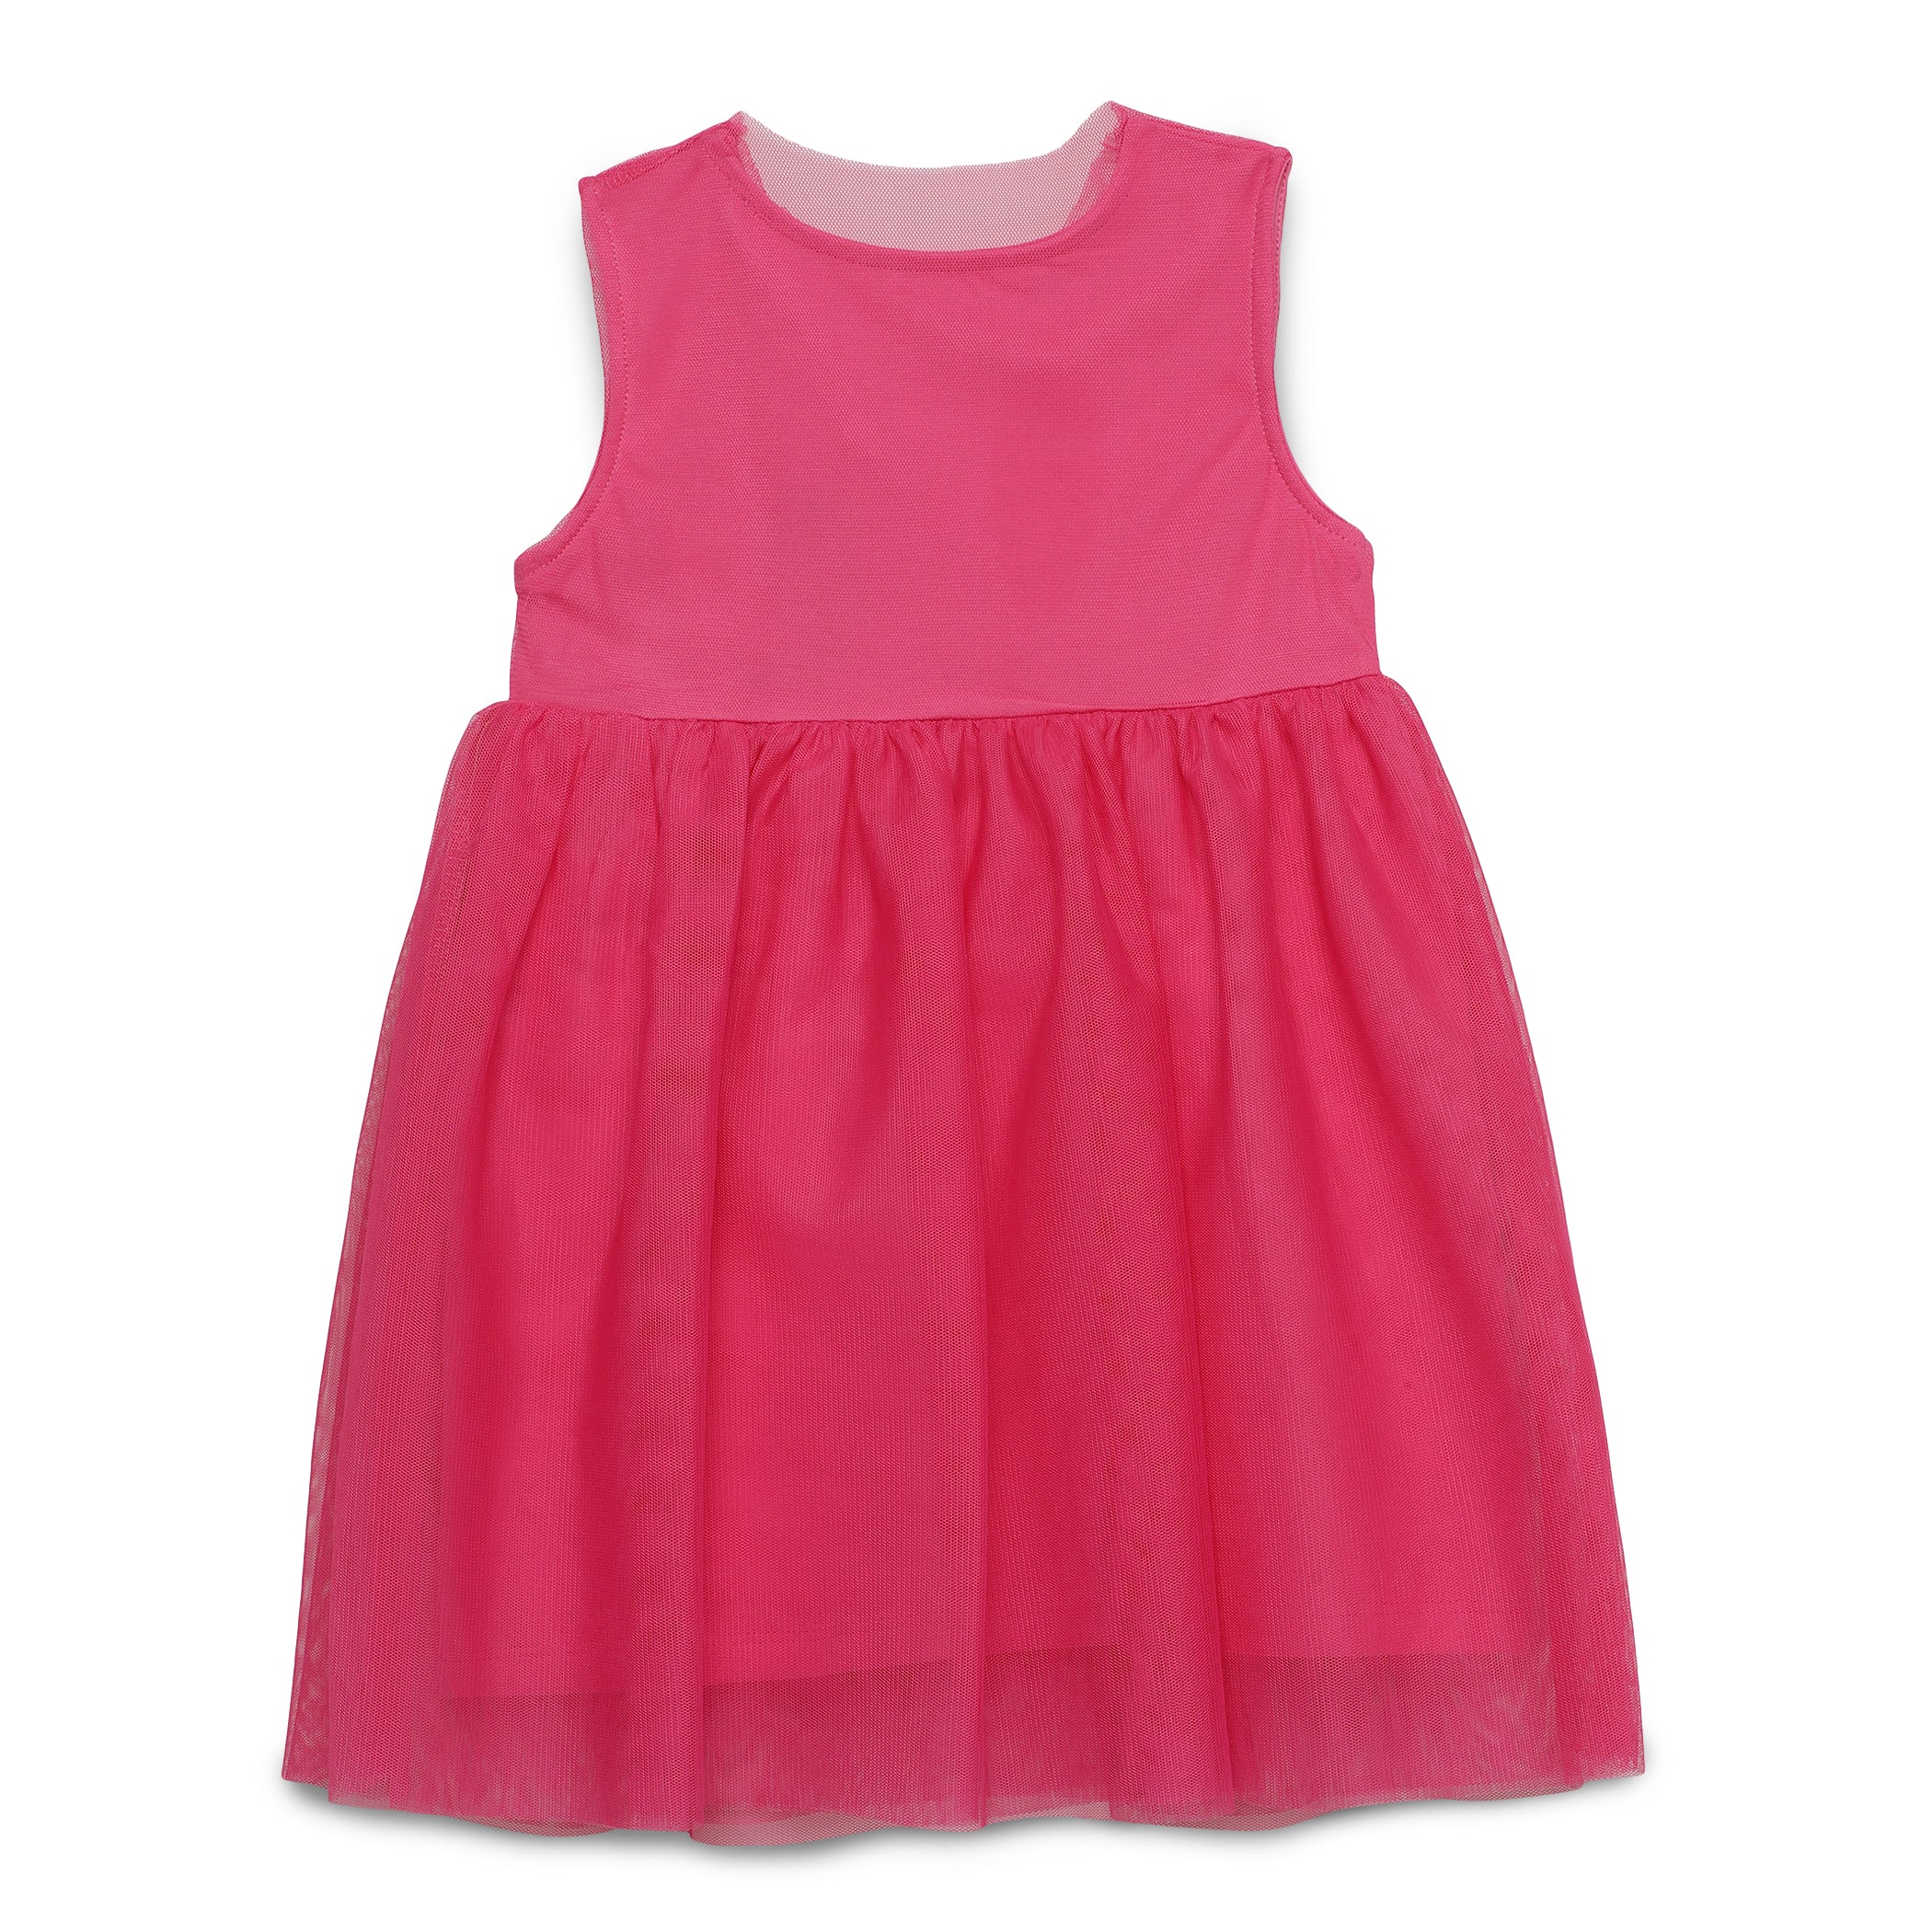 Baby Girls Decorative Pink Party Dress